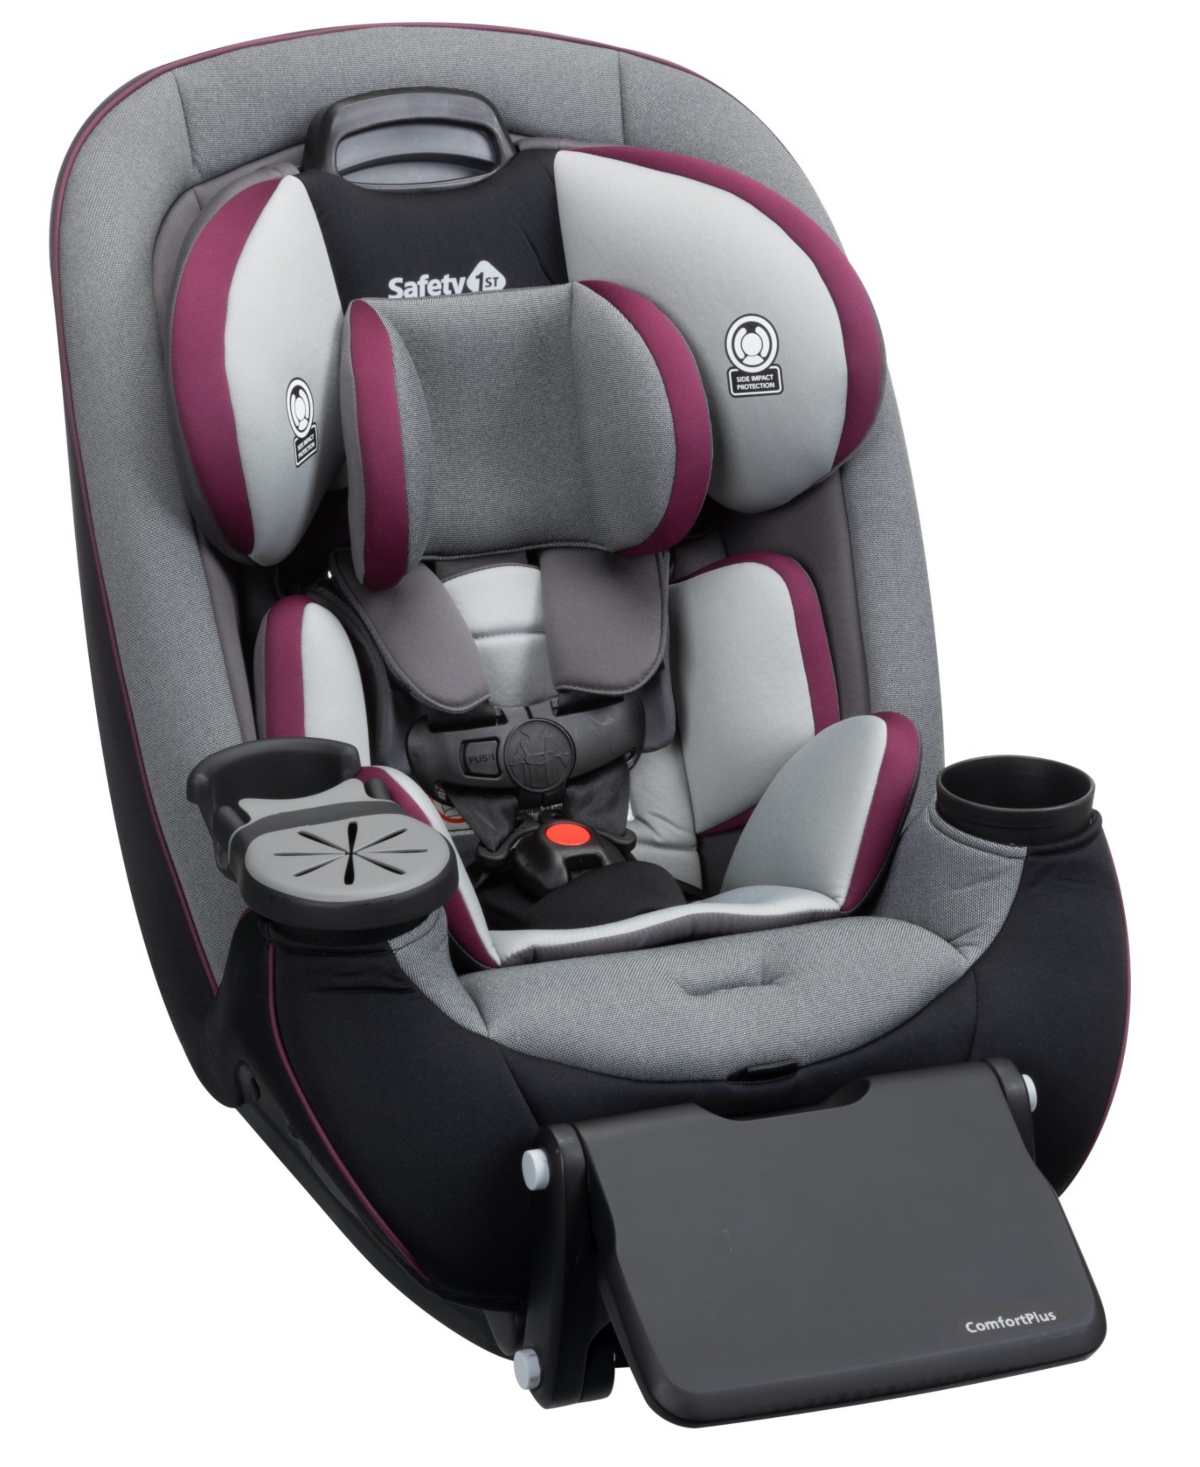 Safety 1st Baby Grow And Go Extend N Ride Lx Convertible One-hand Adjust Car Seat In Winehouse